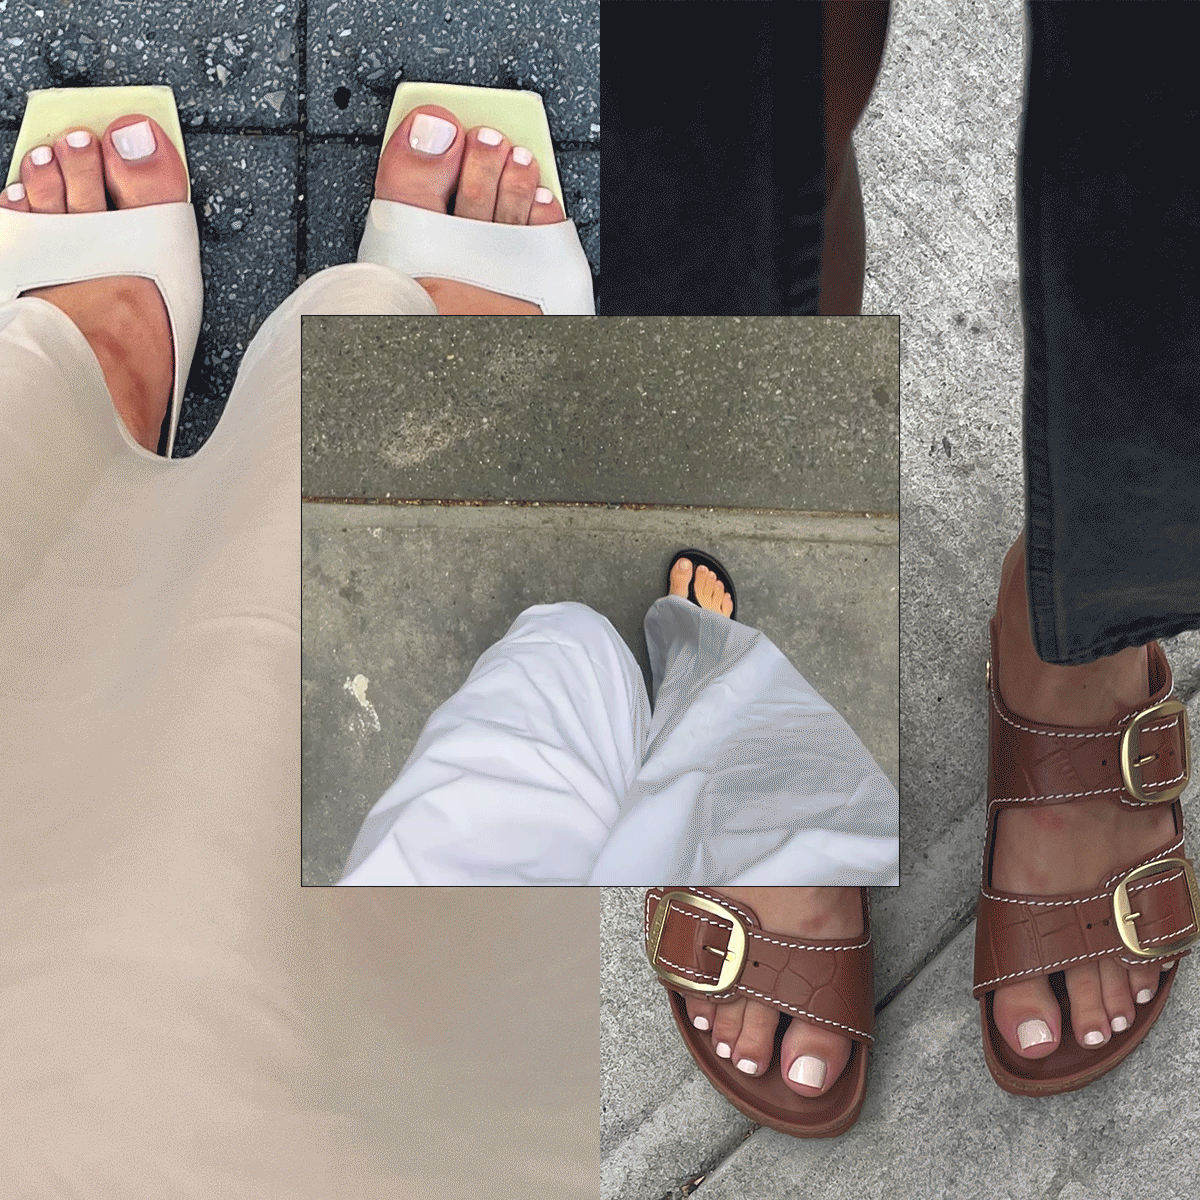 29 Women's Sandals That Are Comfortable To Walk In